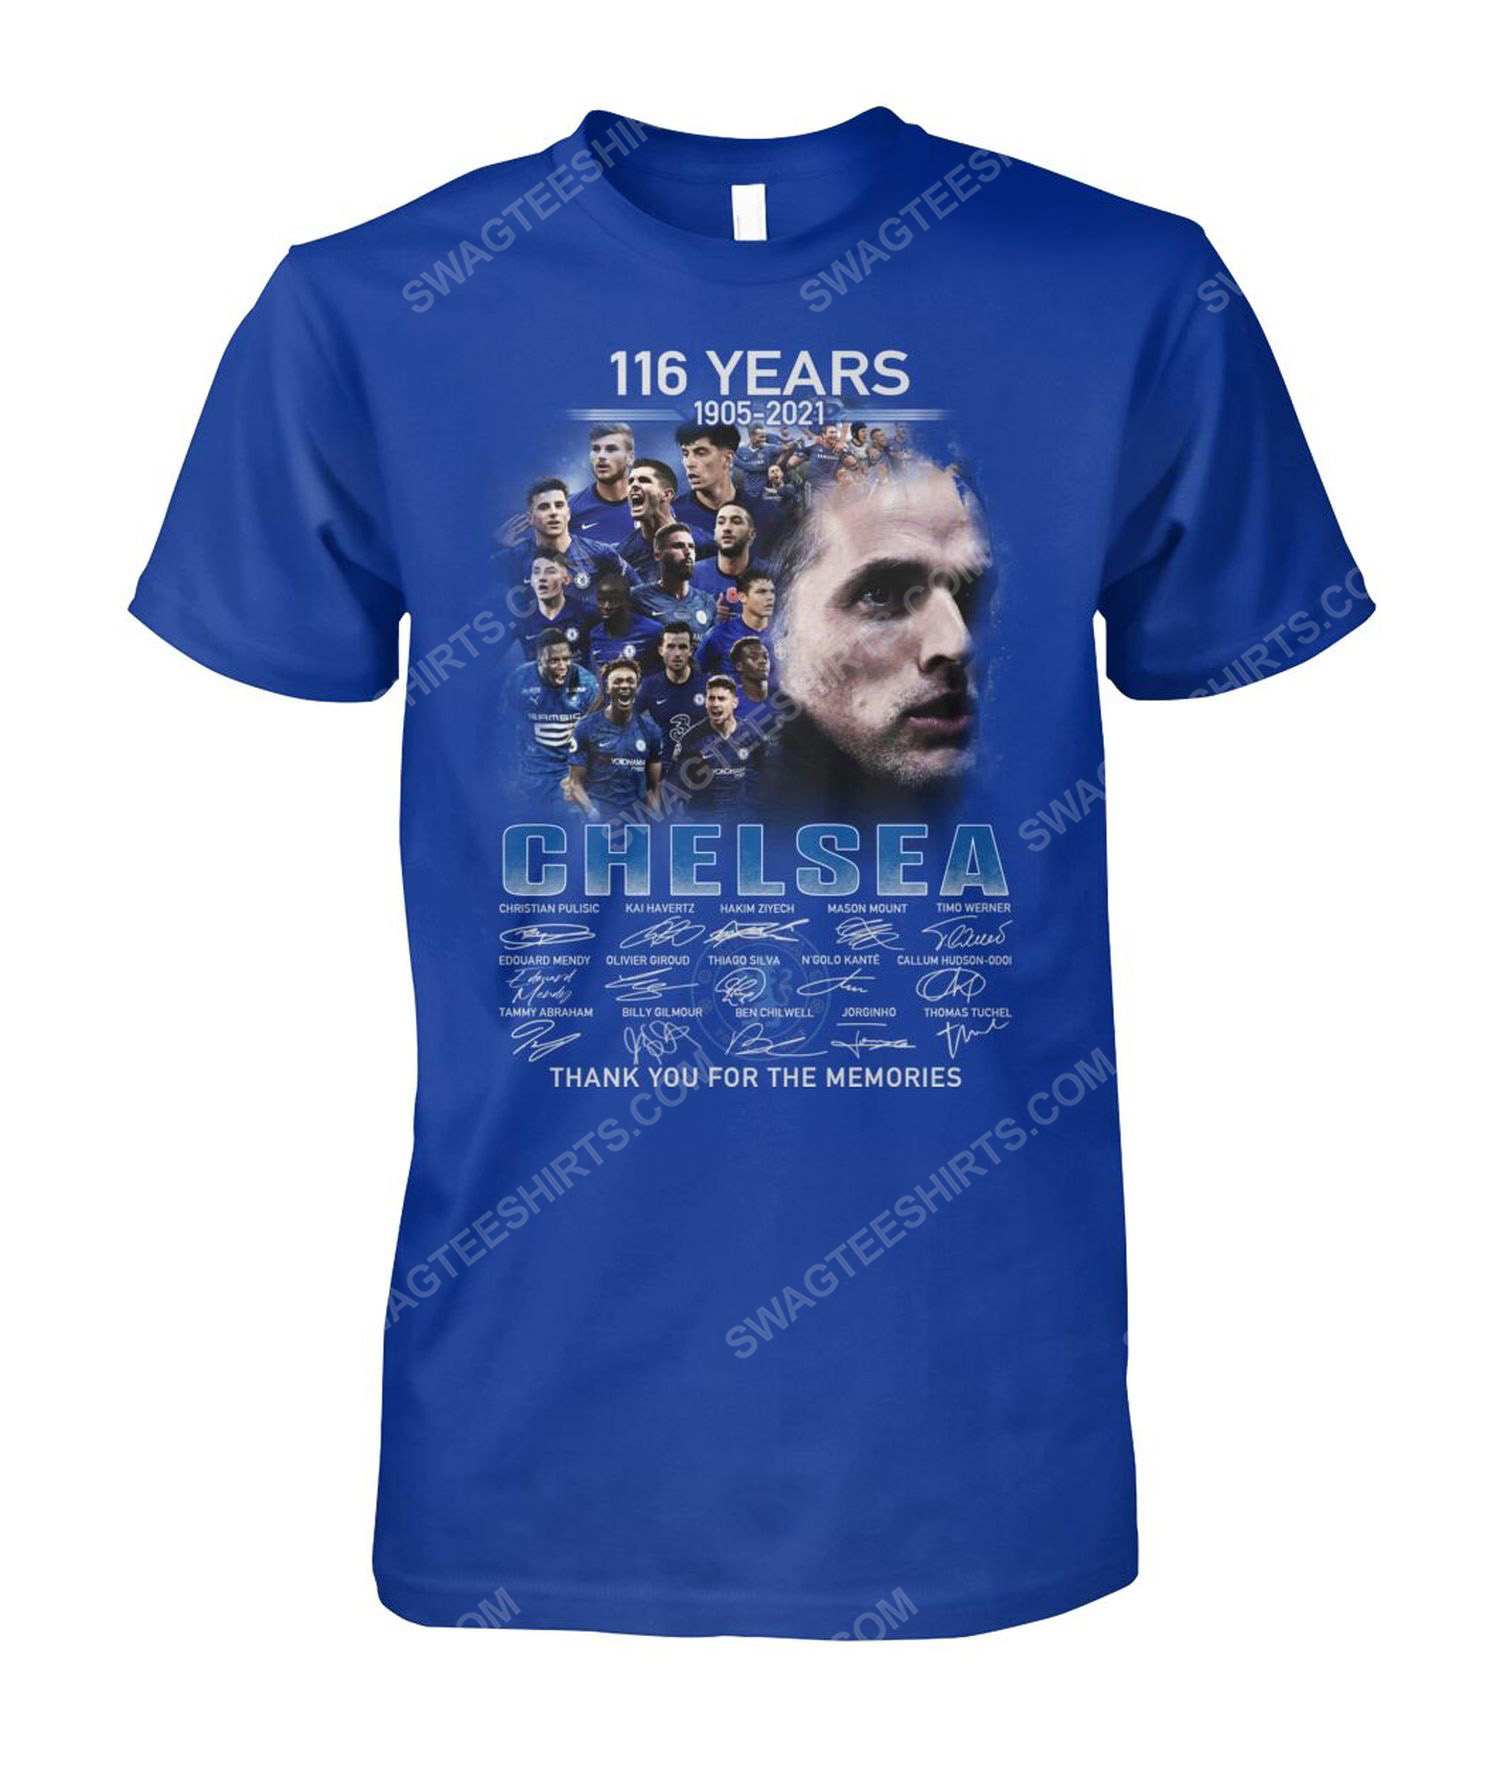 Chelsea fc thank you for the memories tshirt